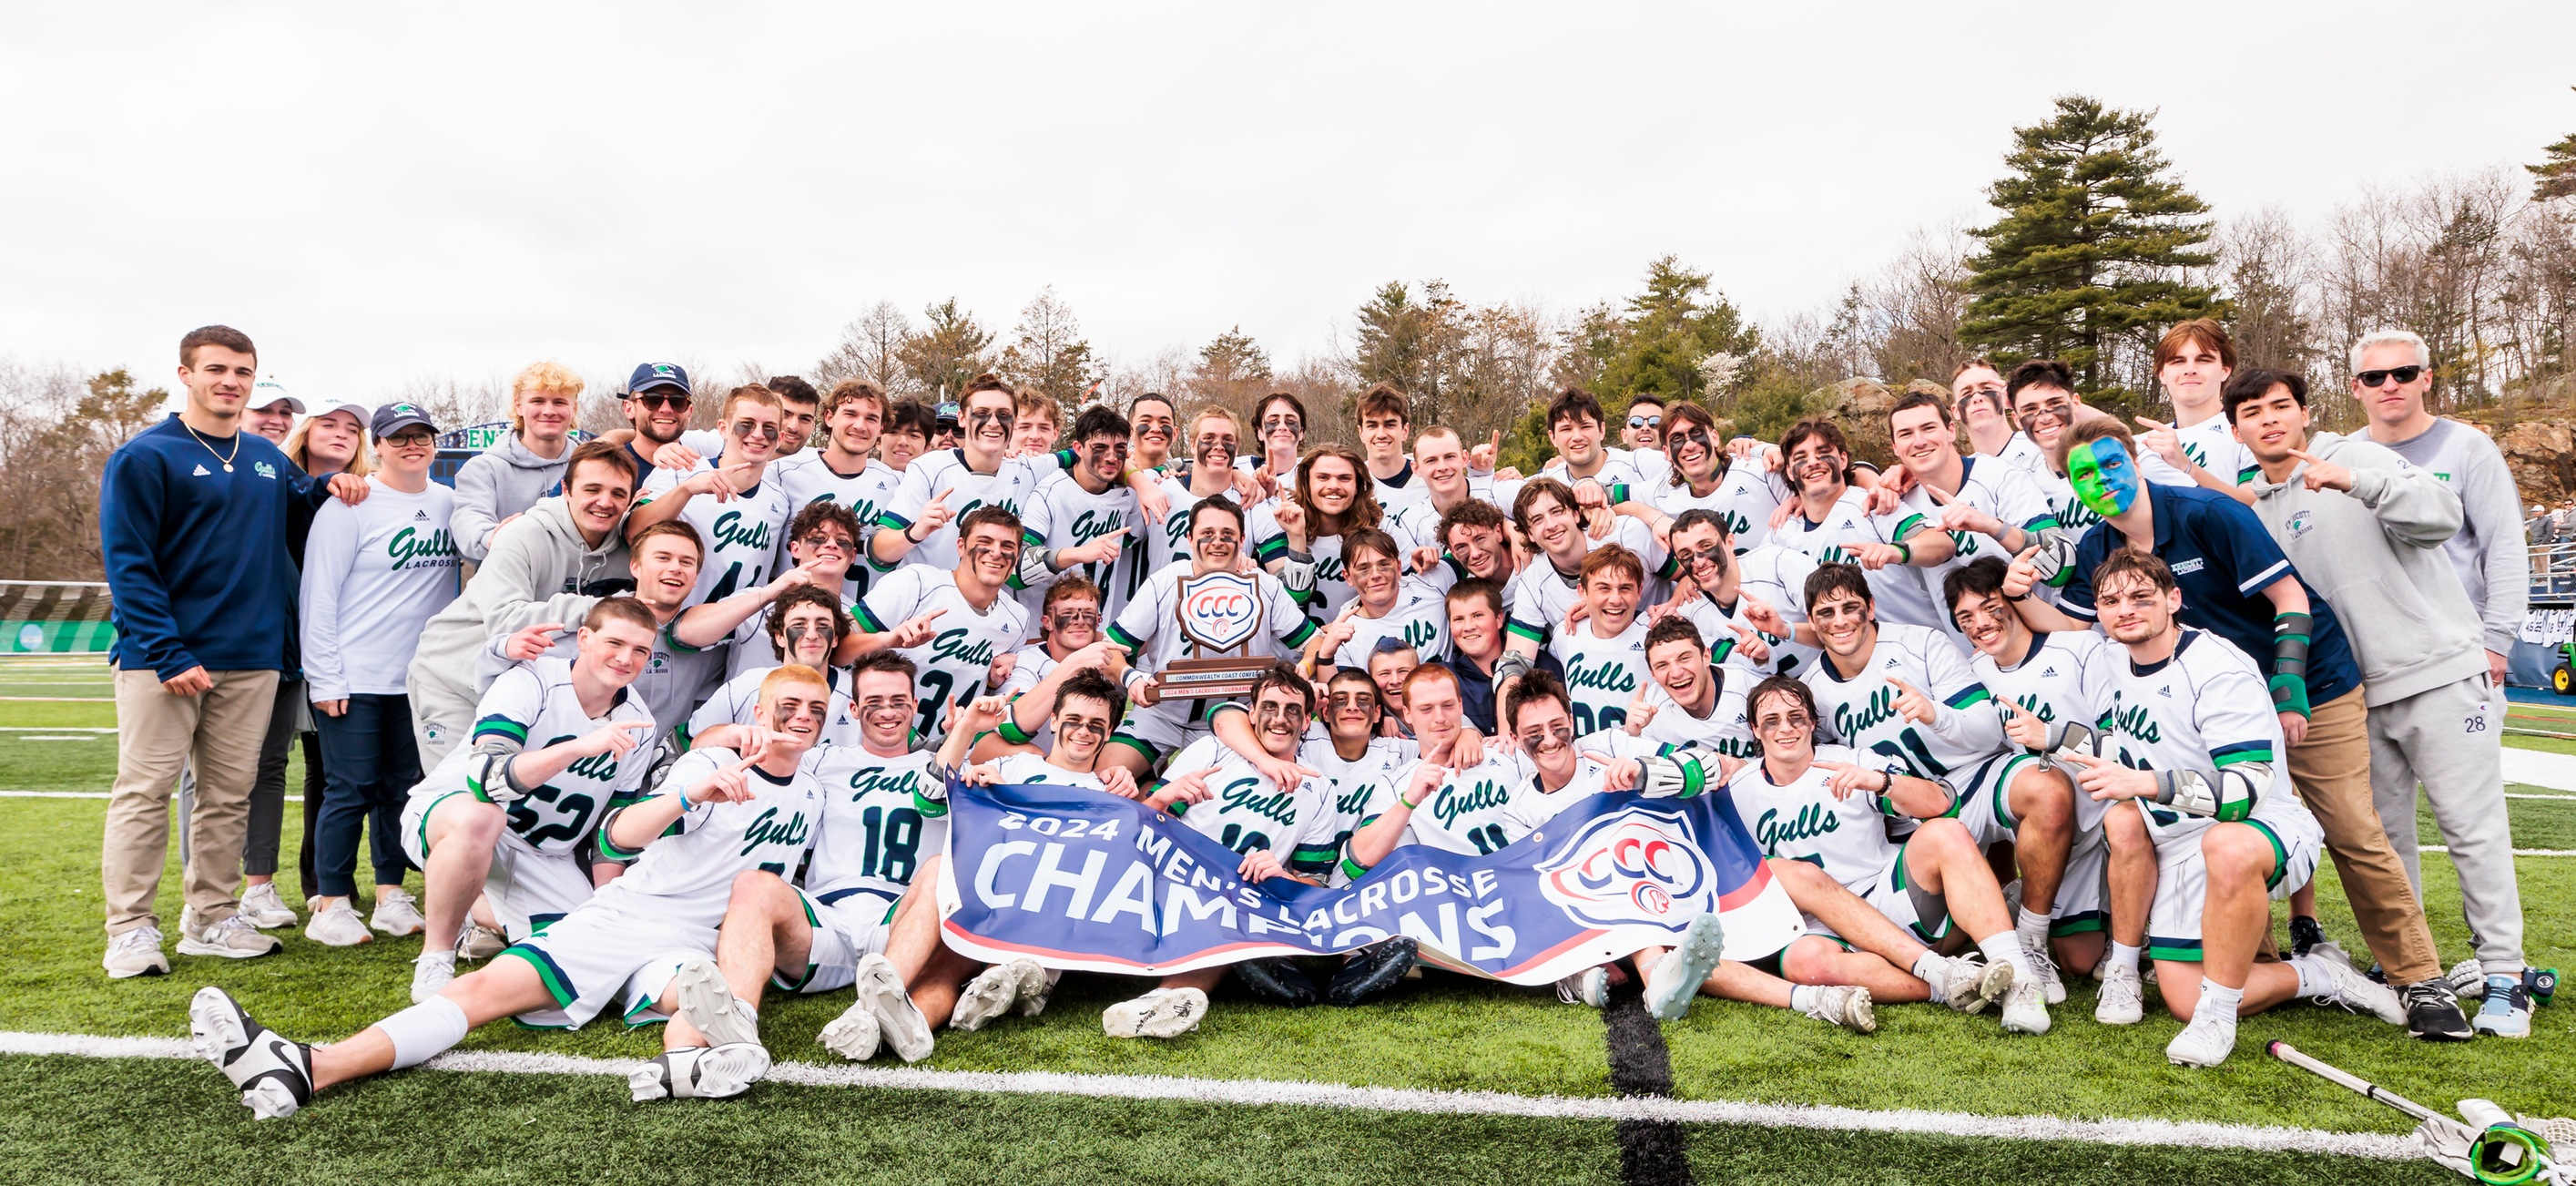 CCC CHAMPIONSHIP: No. 17/19 Endicott Upends Western New England, 17-6